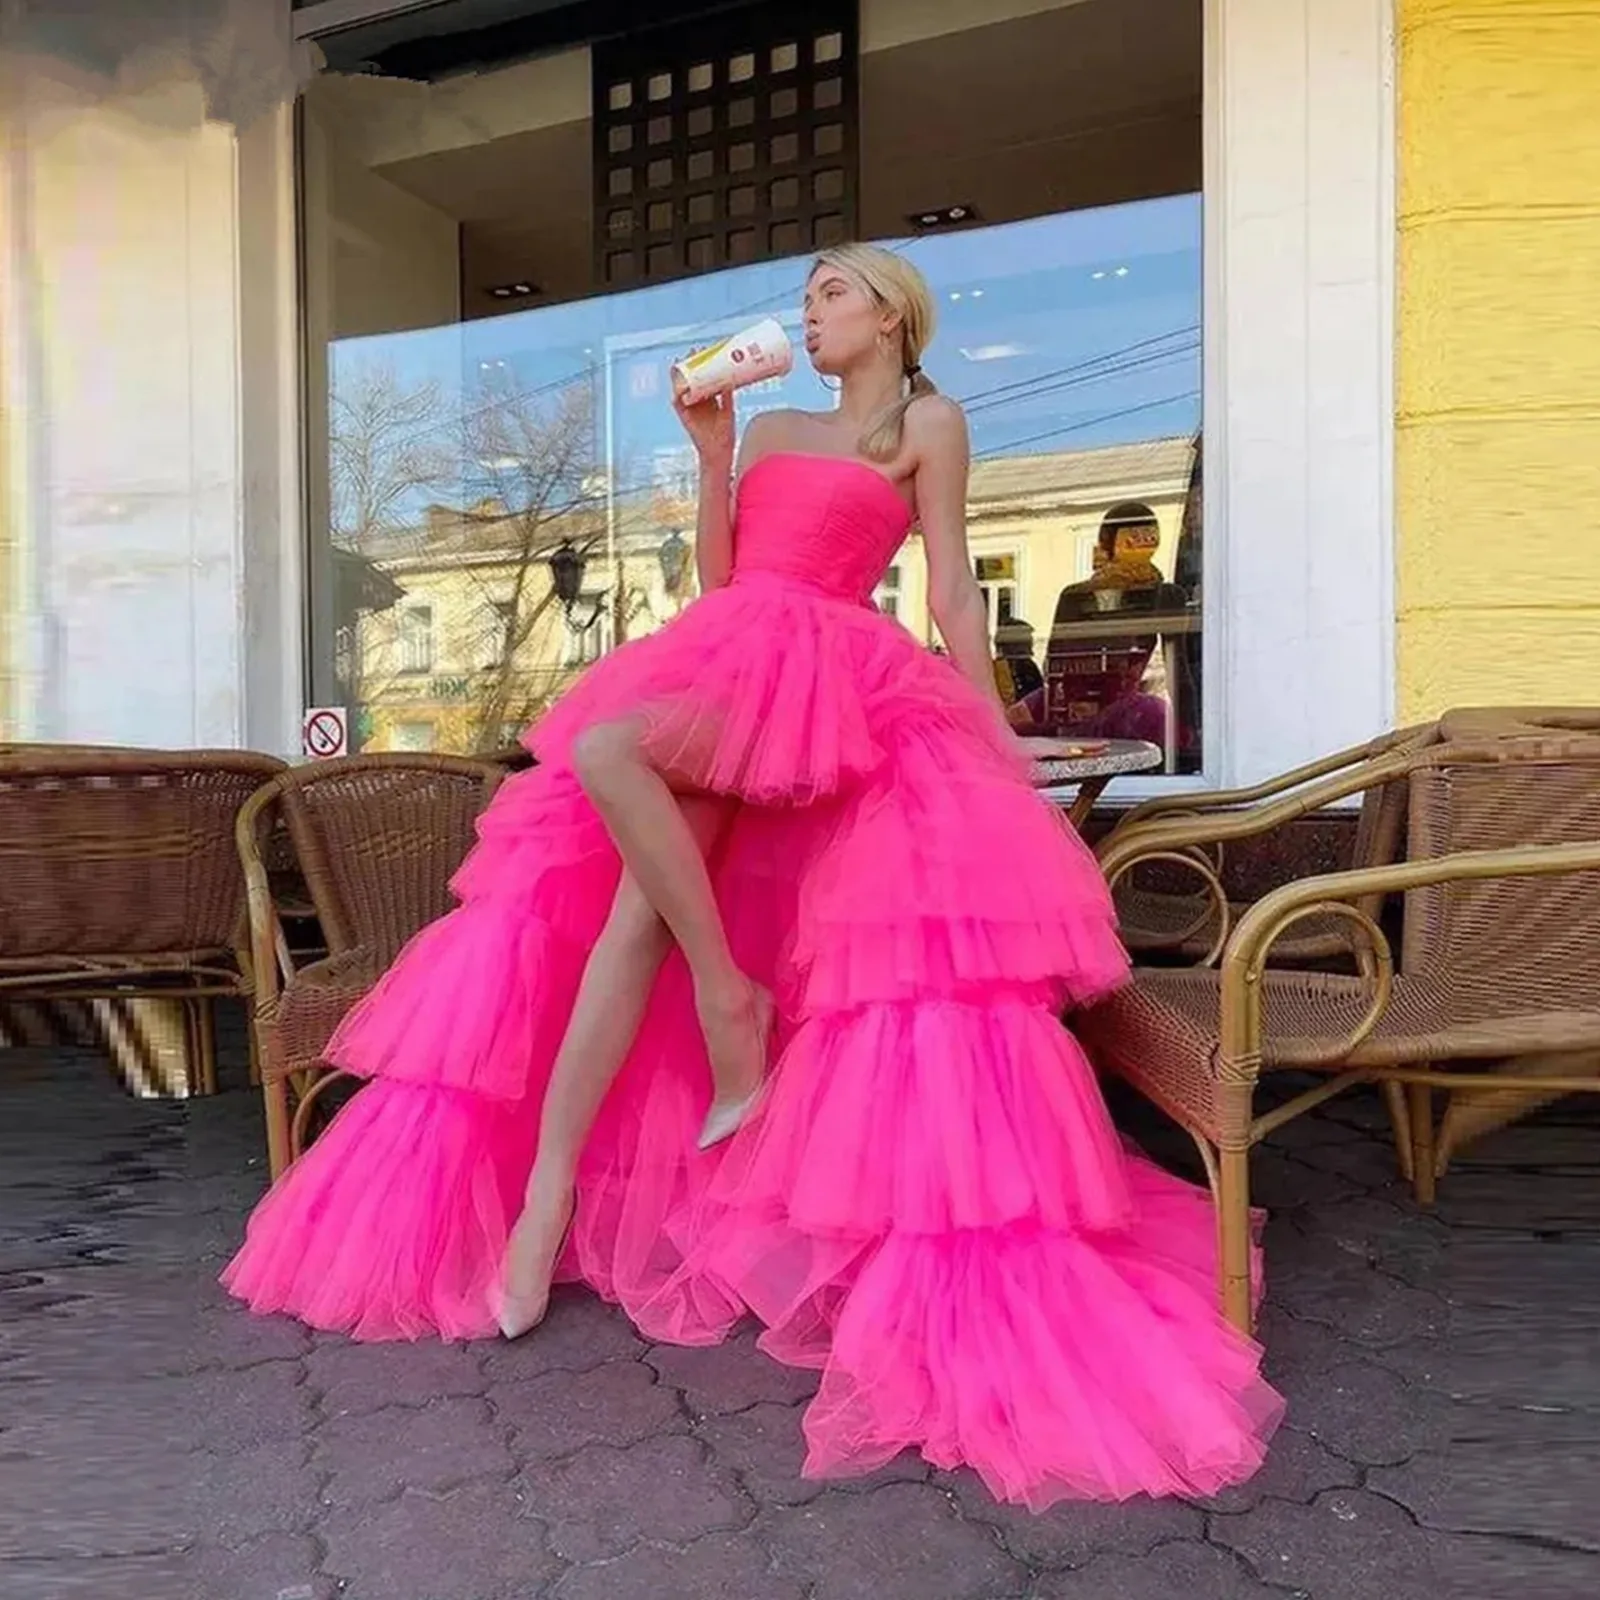 

Hot Pink High Low Puffy A Line Prom Dresses Ruched Strapless Tiered Tulle Tutu Skirts Cocktail Party Dress Evening Gown